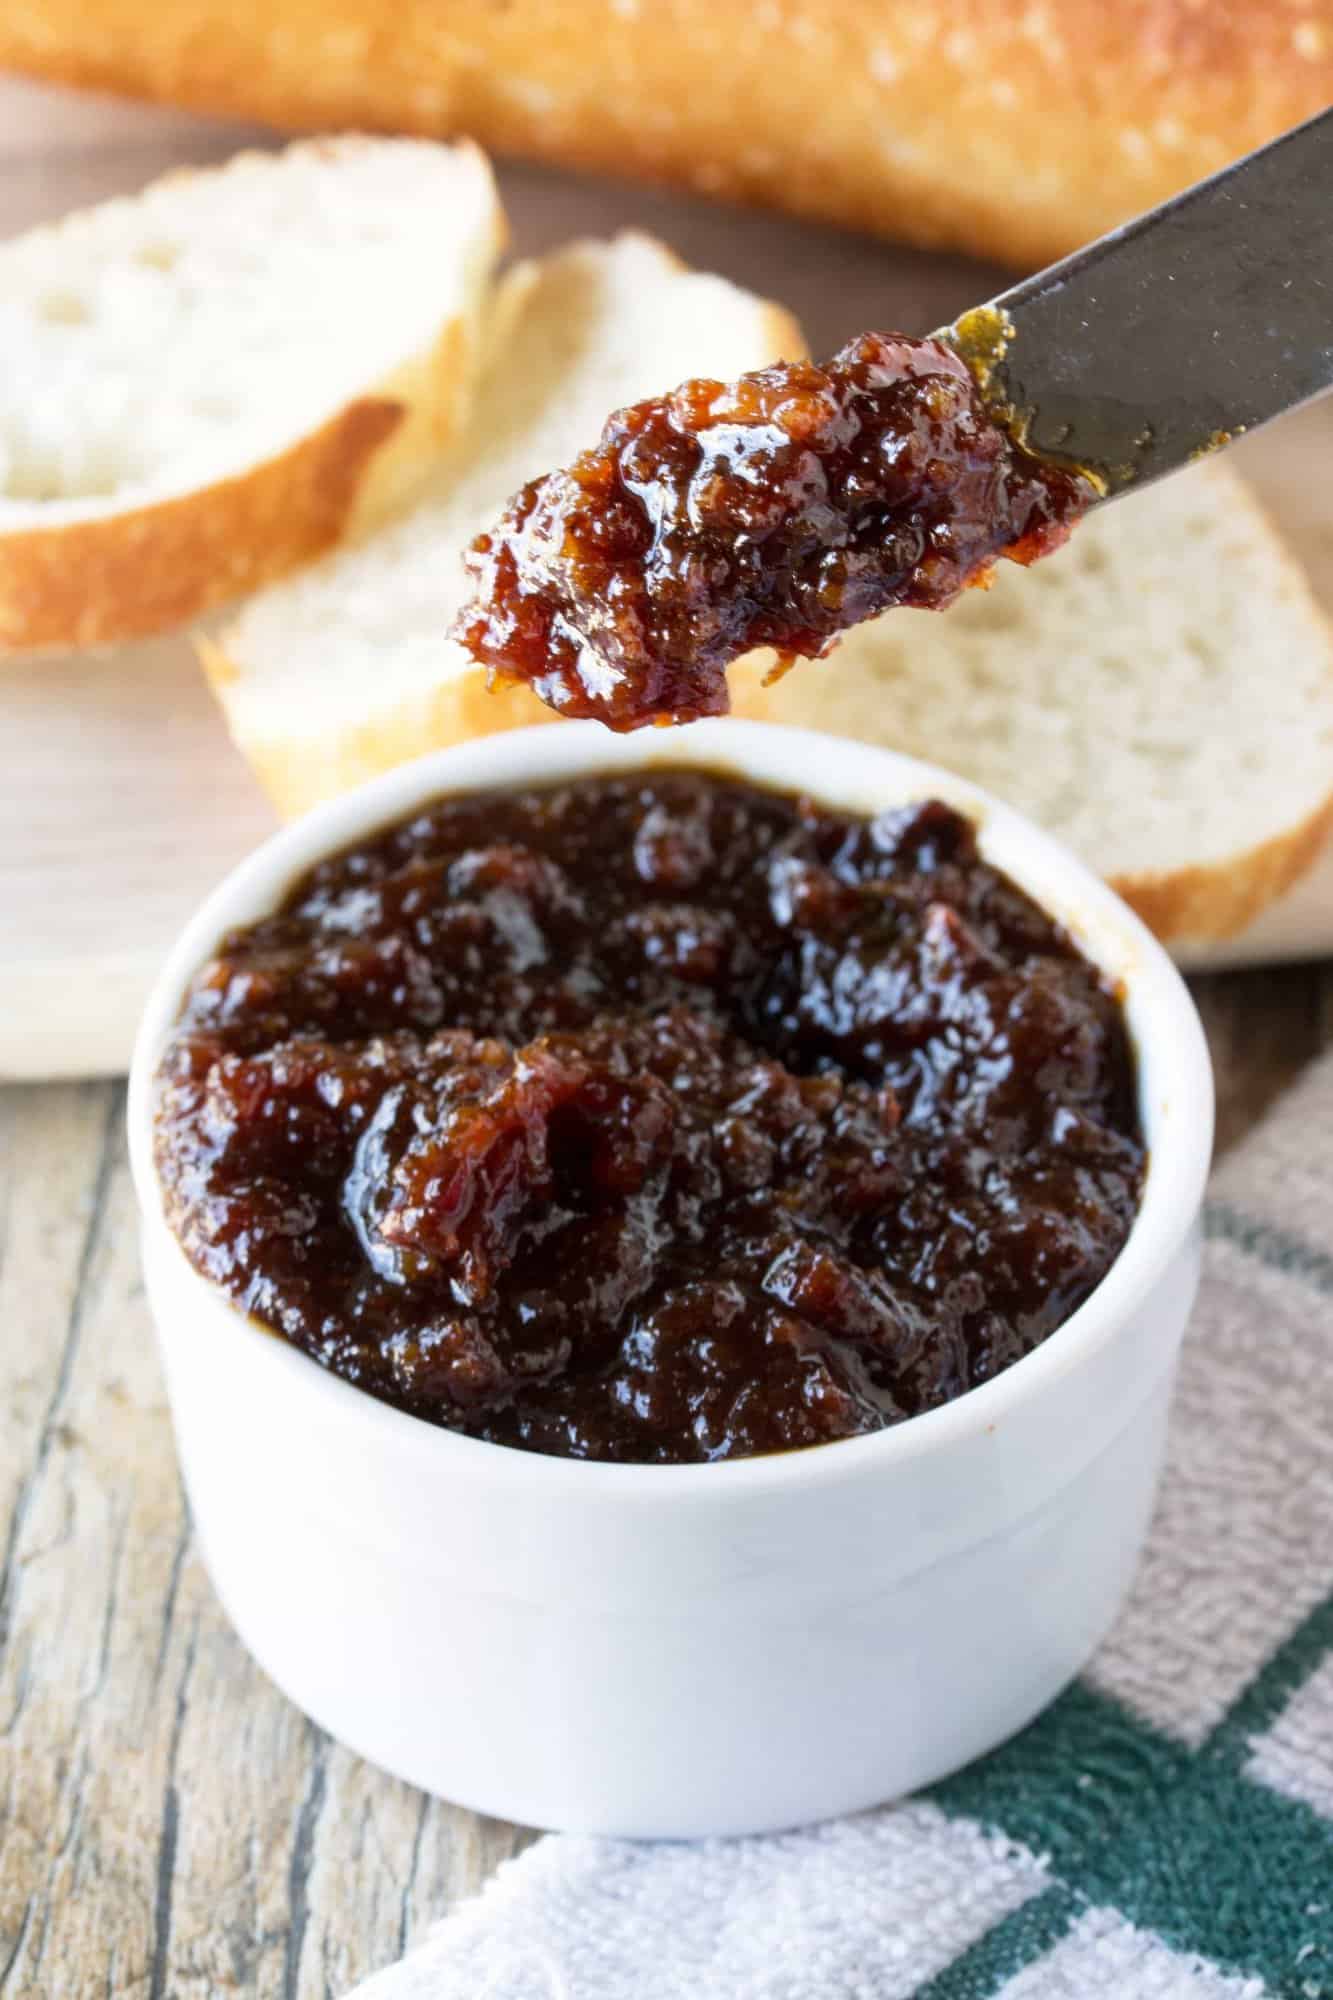 Bacon lovers will go crazy for this ultra delicious Bacon Jam. Use it on everything from toast and pancakes to soups and sandwiches. Bacon jam is a bacon lover’s dream come true!